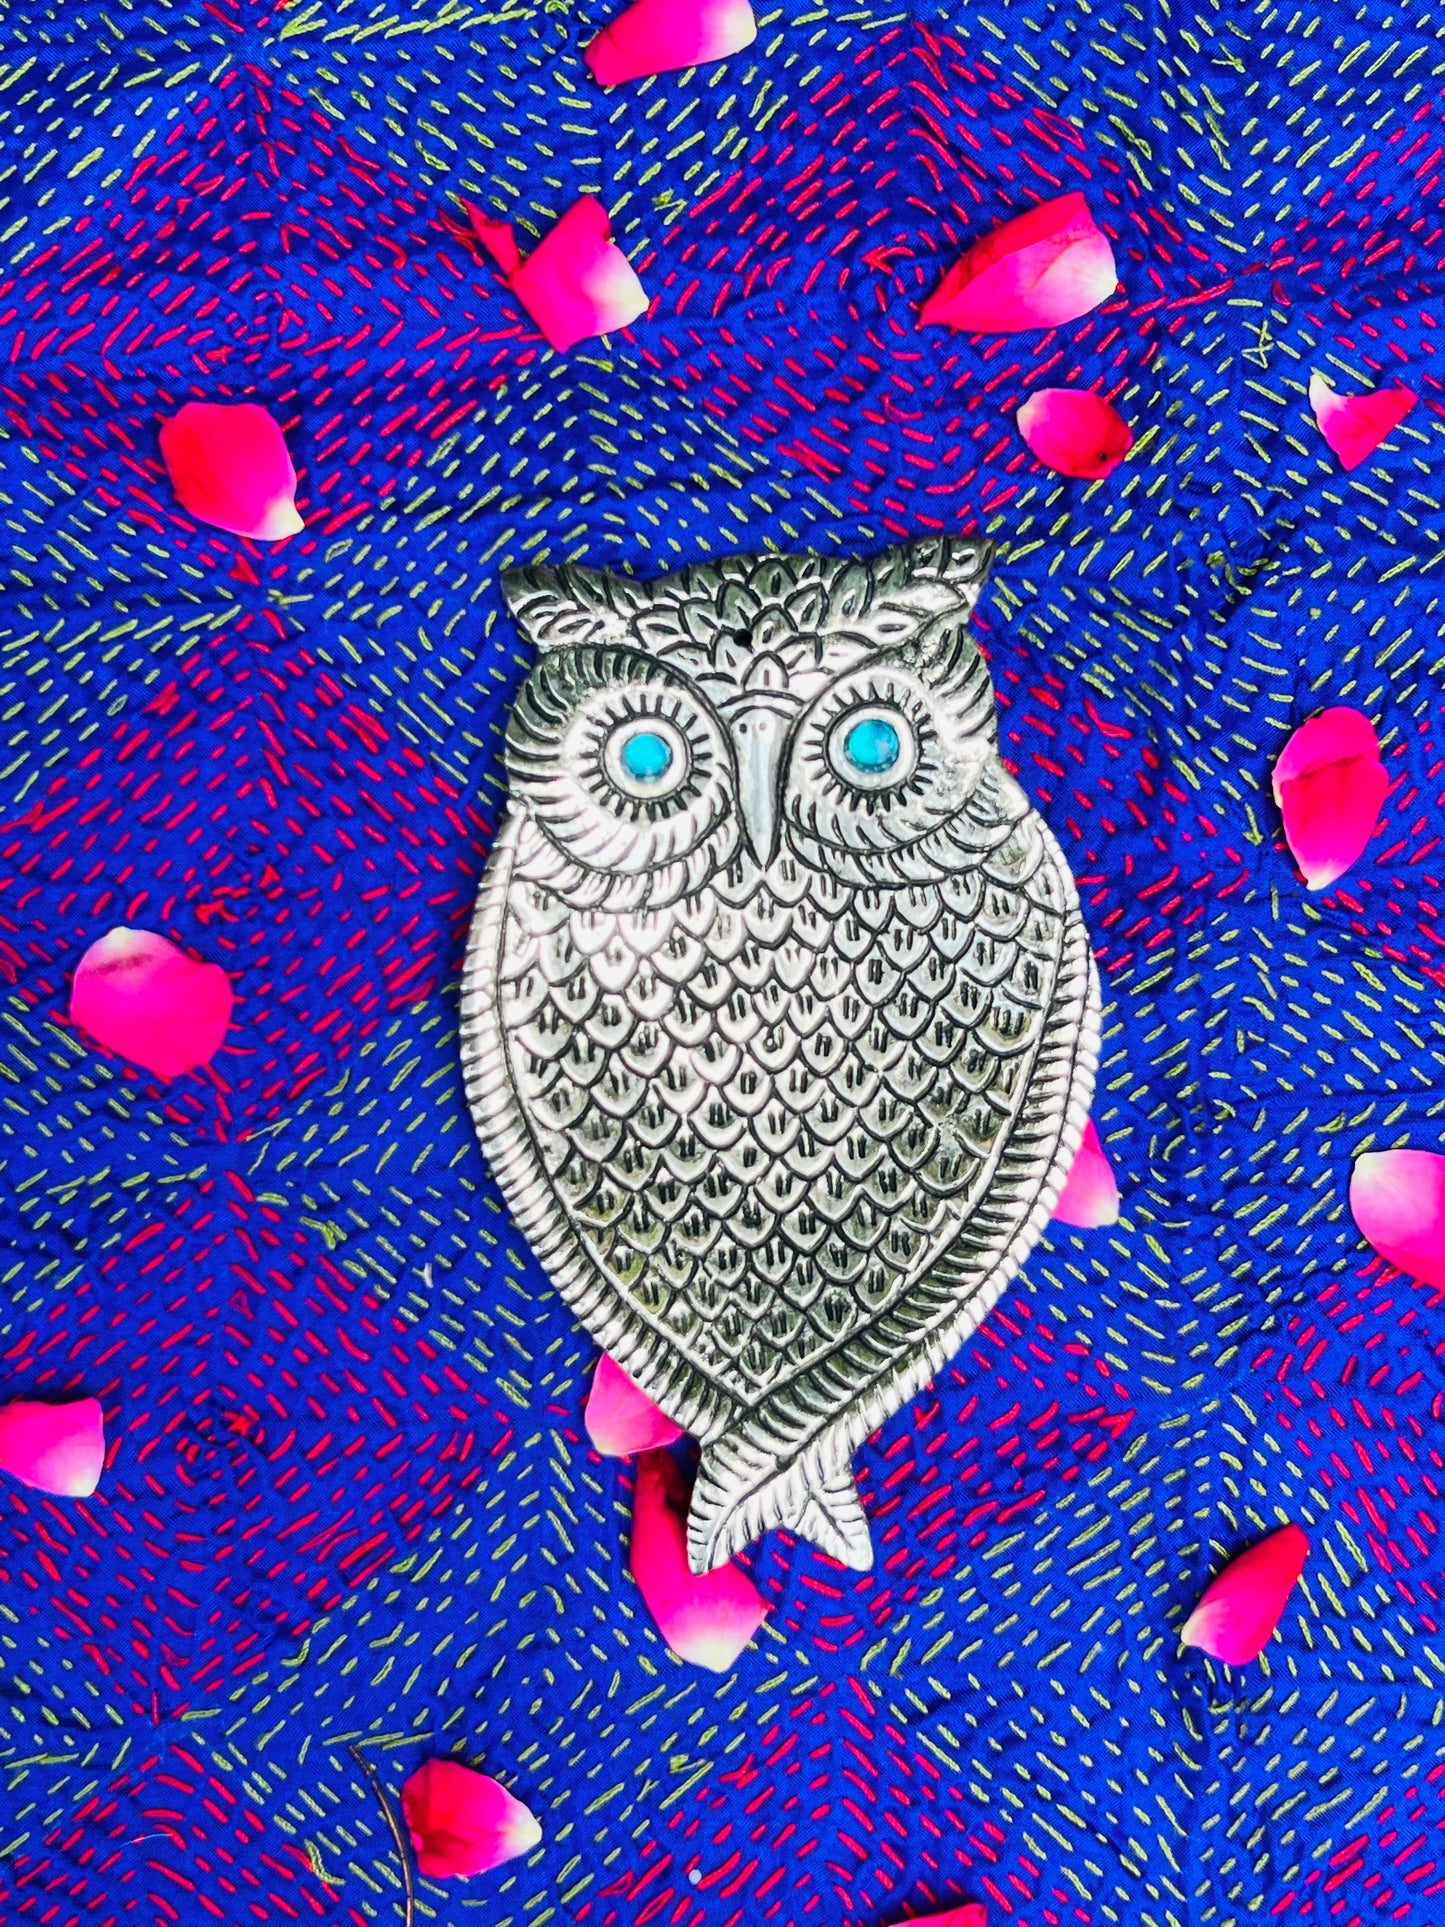 Owl Incense Stick Holder  The Source India is an Indian Handicraft, Home Decor, Furnishing and Textiles Store. Based out of Hauz Khas Village New Delhi, each piece is carefully procured to allow the enhancement of India's Culture.